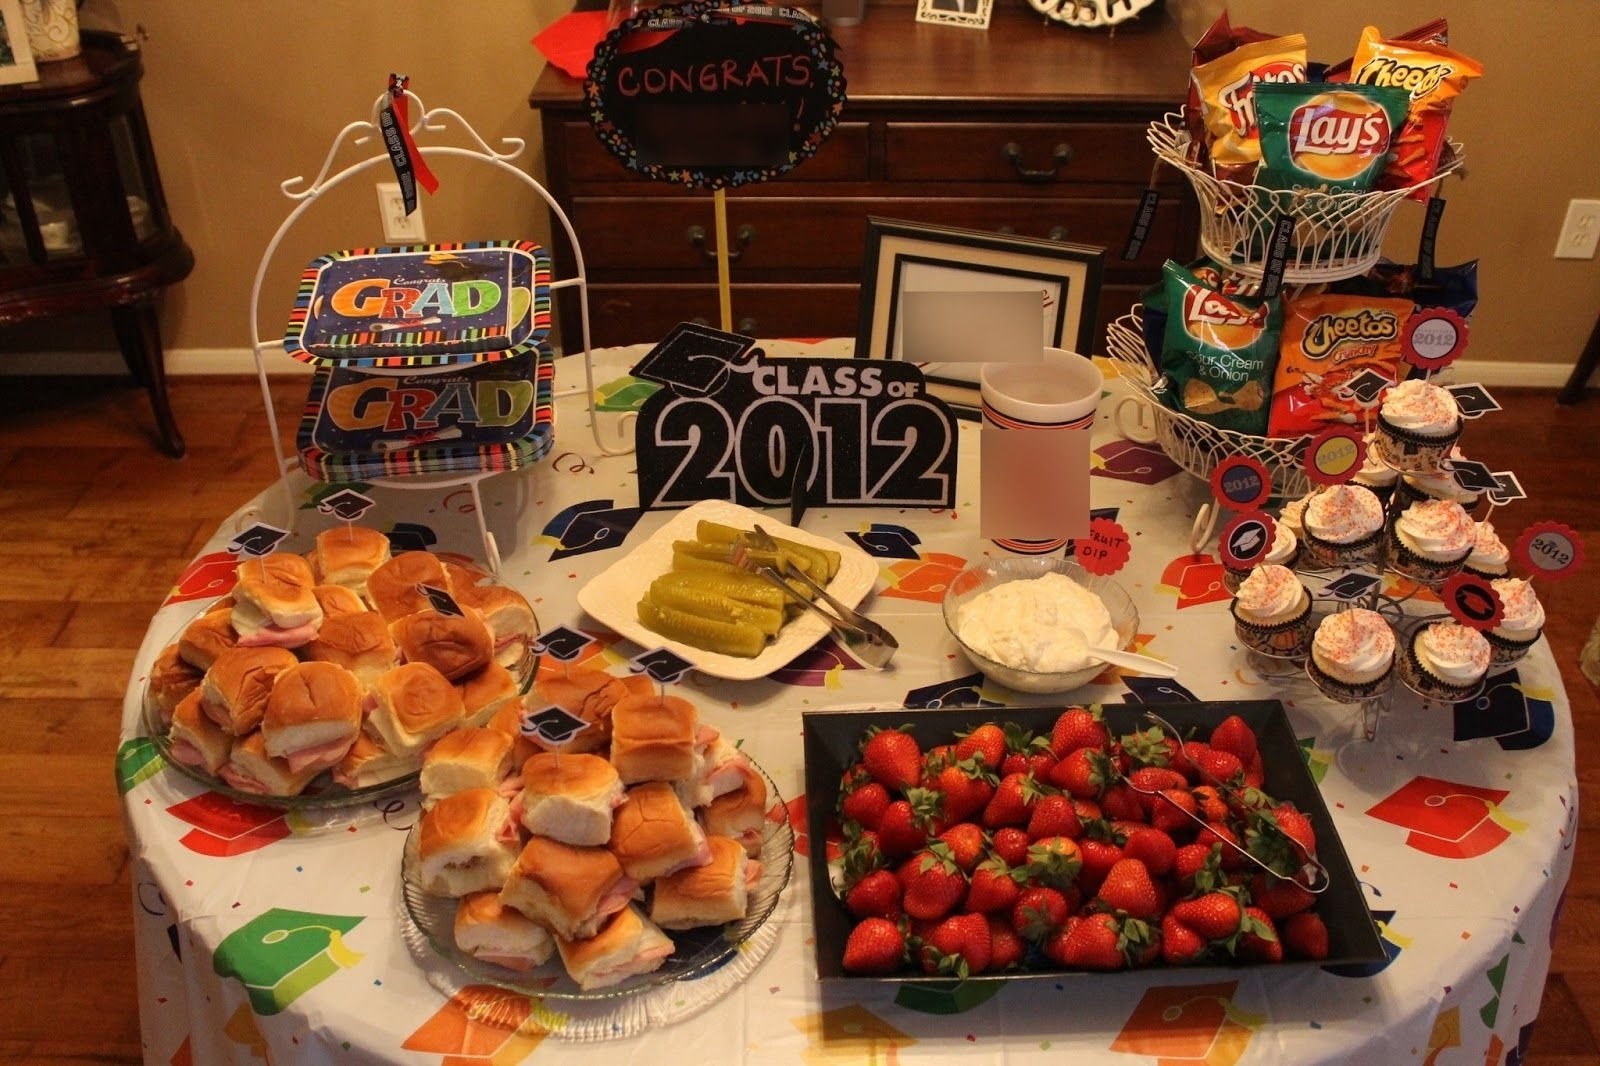 10 Lovable Food Ideas For Graduation Parties graduation decoration ideas this is just a simple banner i 5 2022